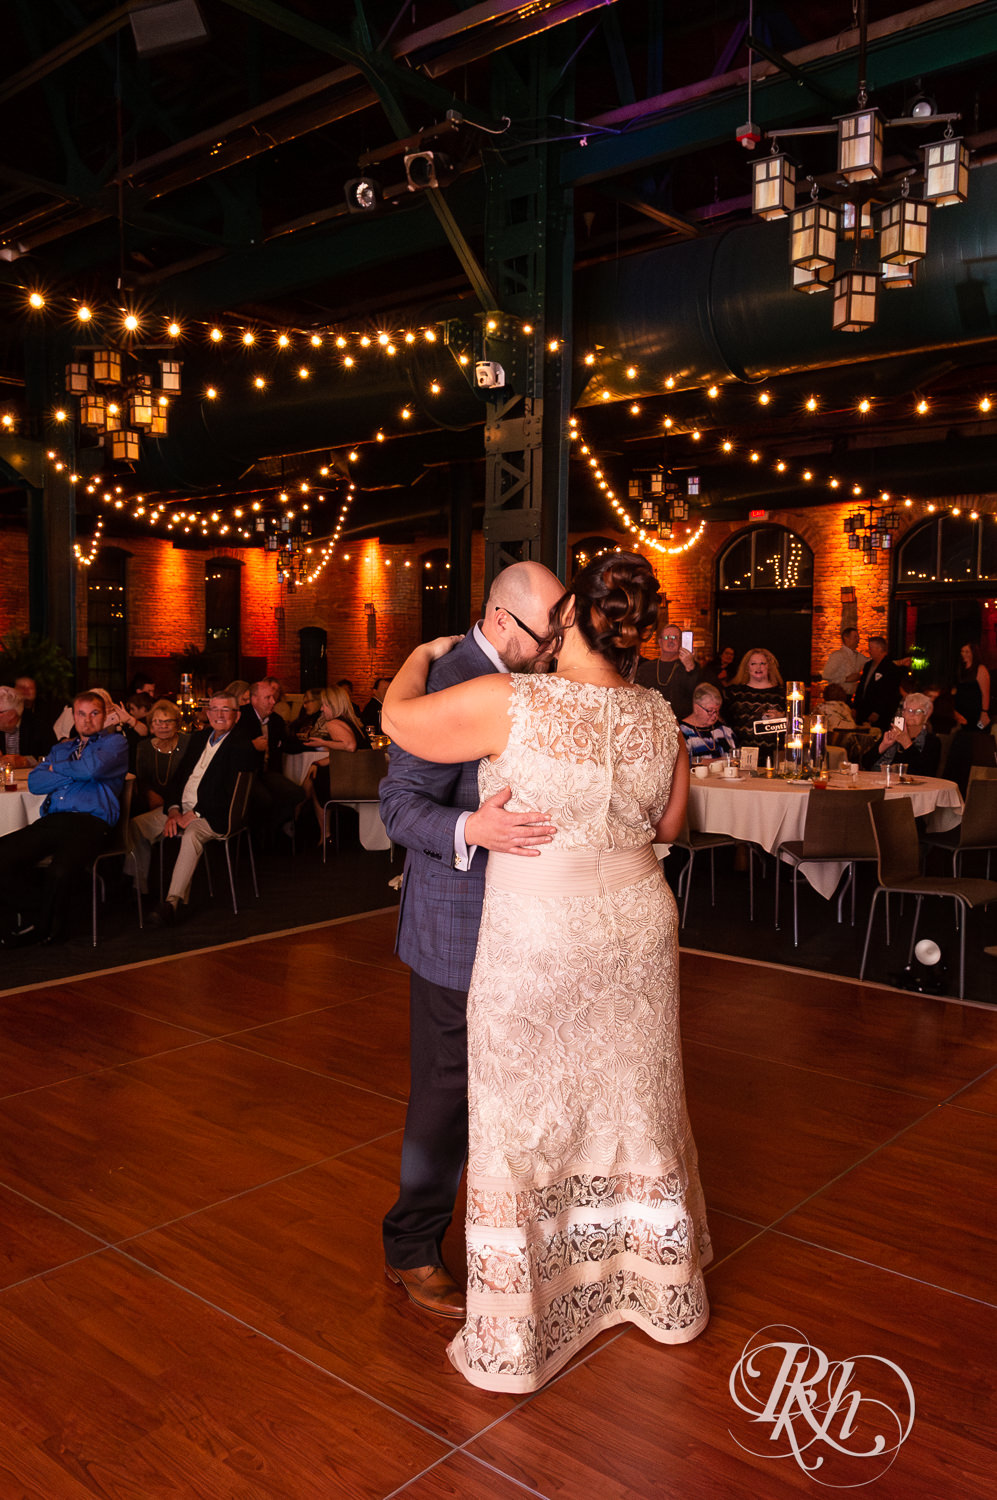 Bride and groom share first wedding dance at Nicollet Island Pavilion in Minneapolis, Minnesota.